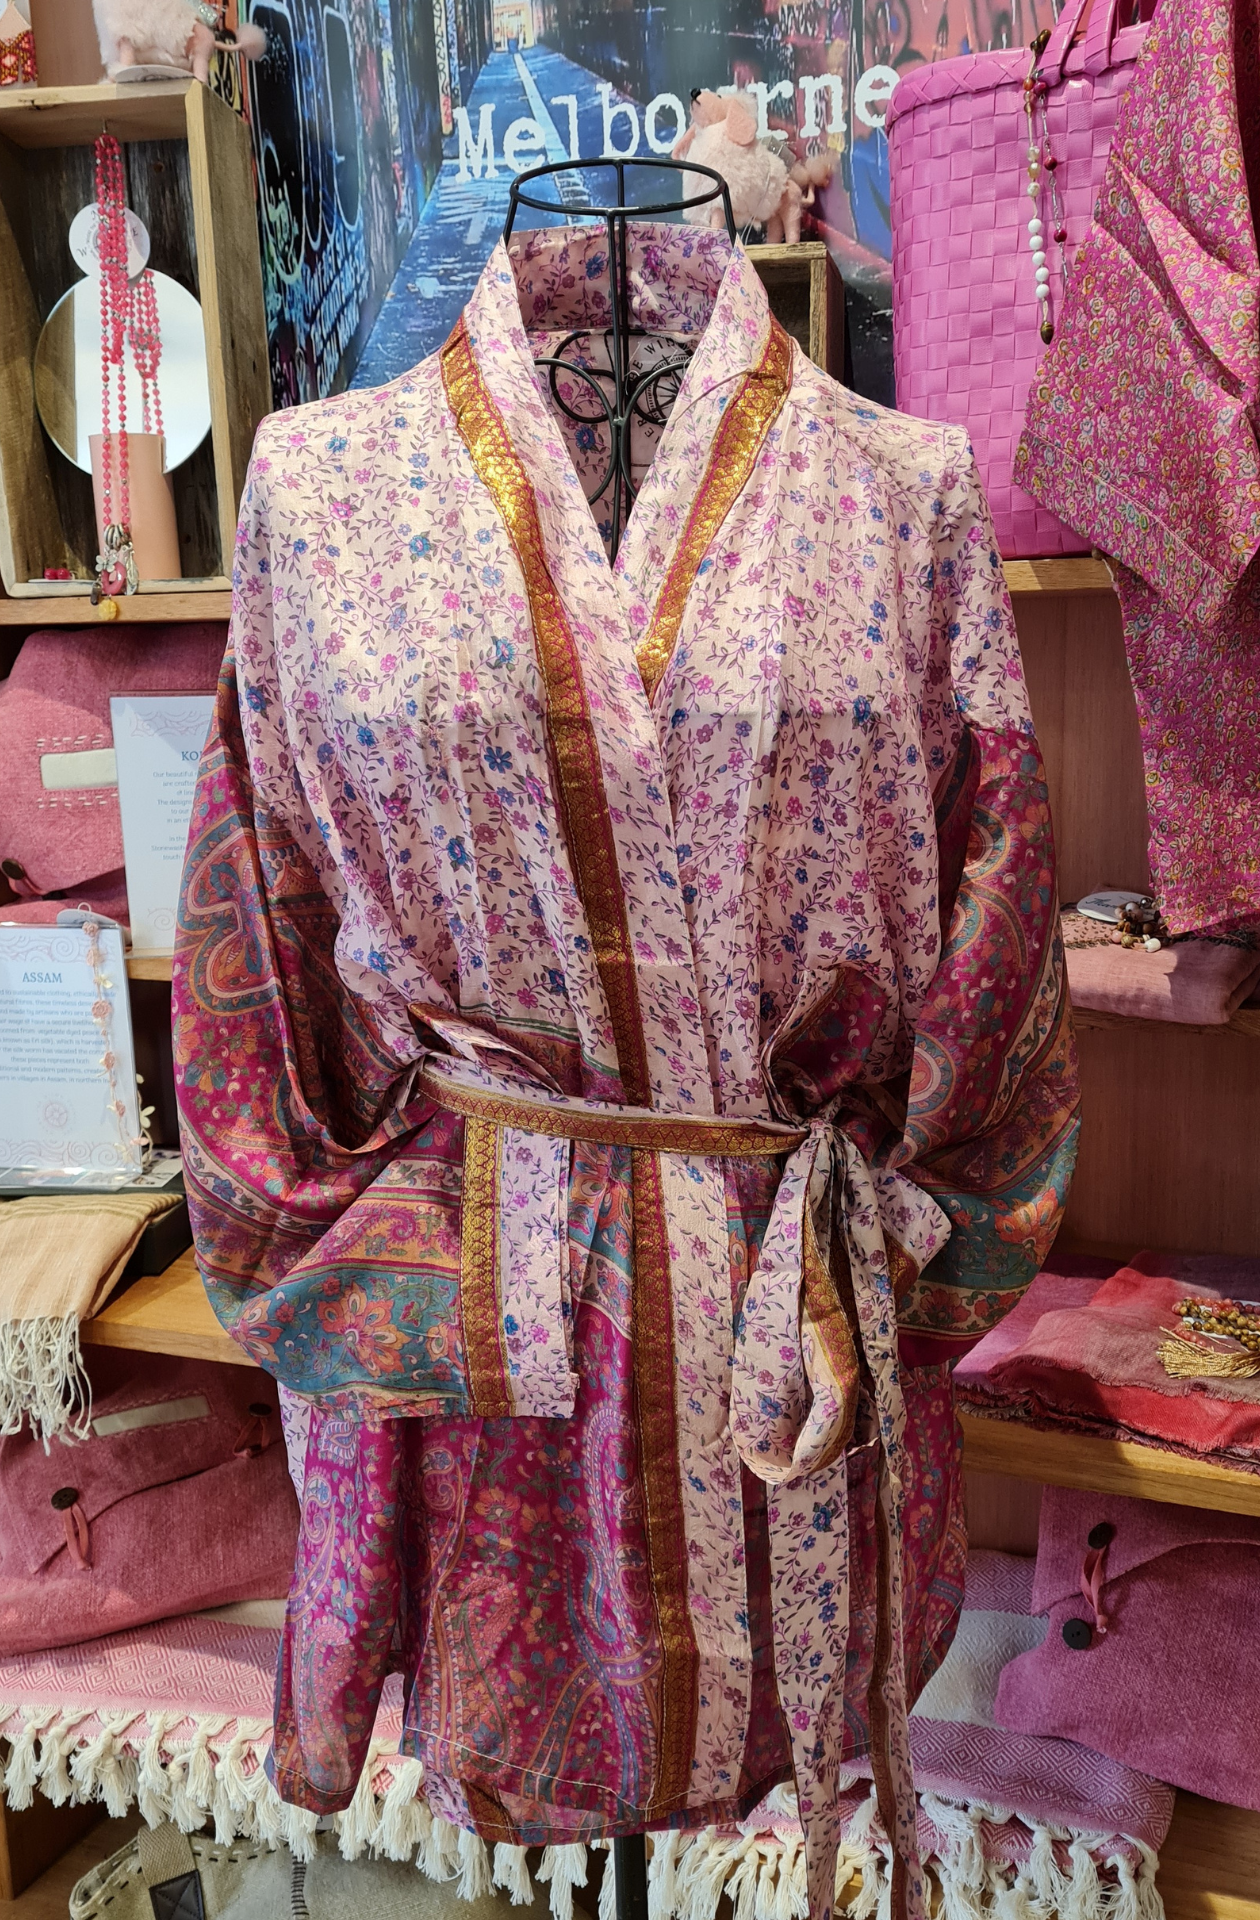 A busy patterned pale pink kimon jacket displayed on a wire mannequinn. The body of the jacket is pale pink with a tight knit blue and pink floral pattern. The sleeves look like beautiful wallpaper/traditional painting patterns, in deep warm pinks and turquoises. There is a gold trim on the edges of the jacket